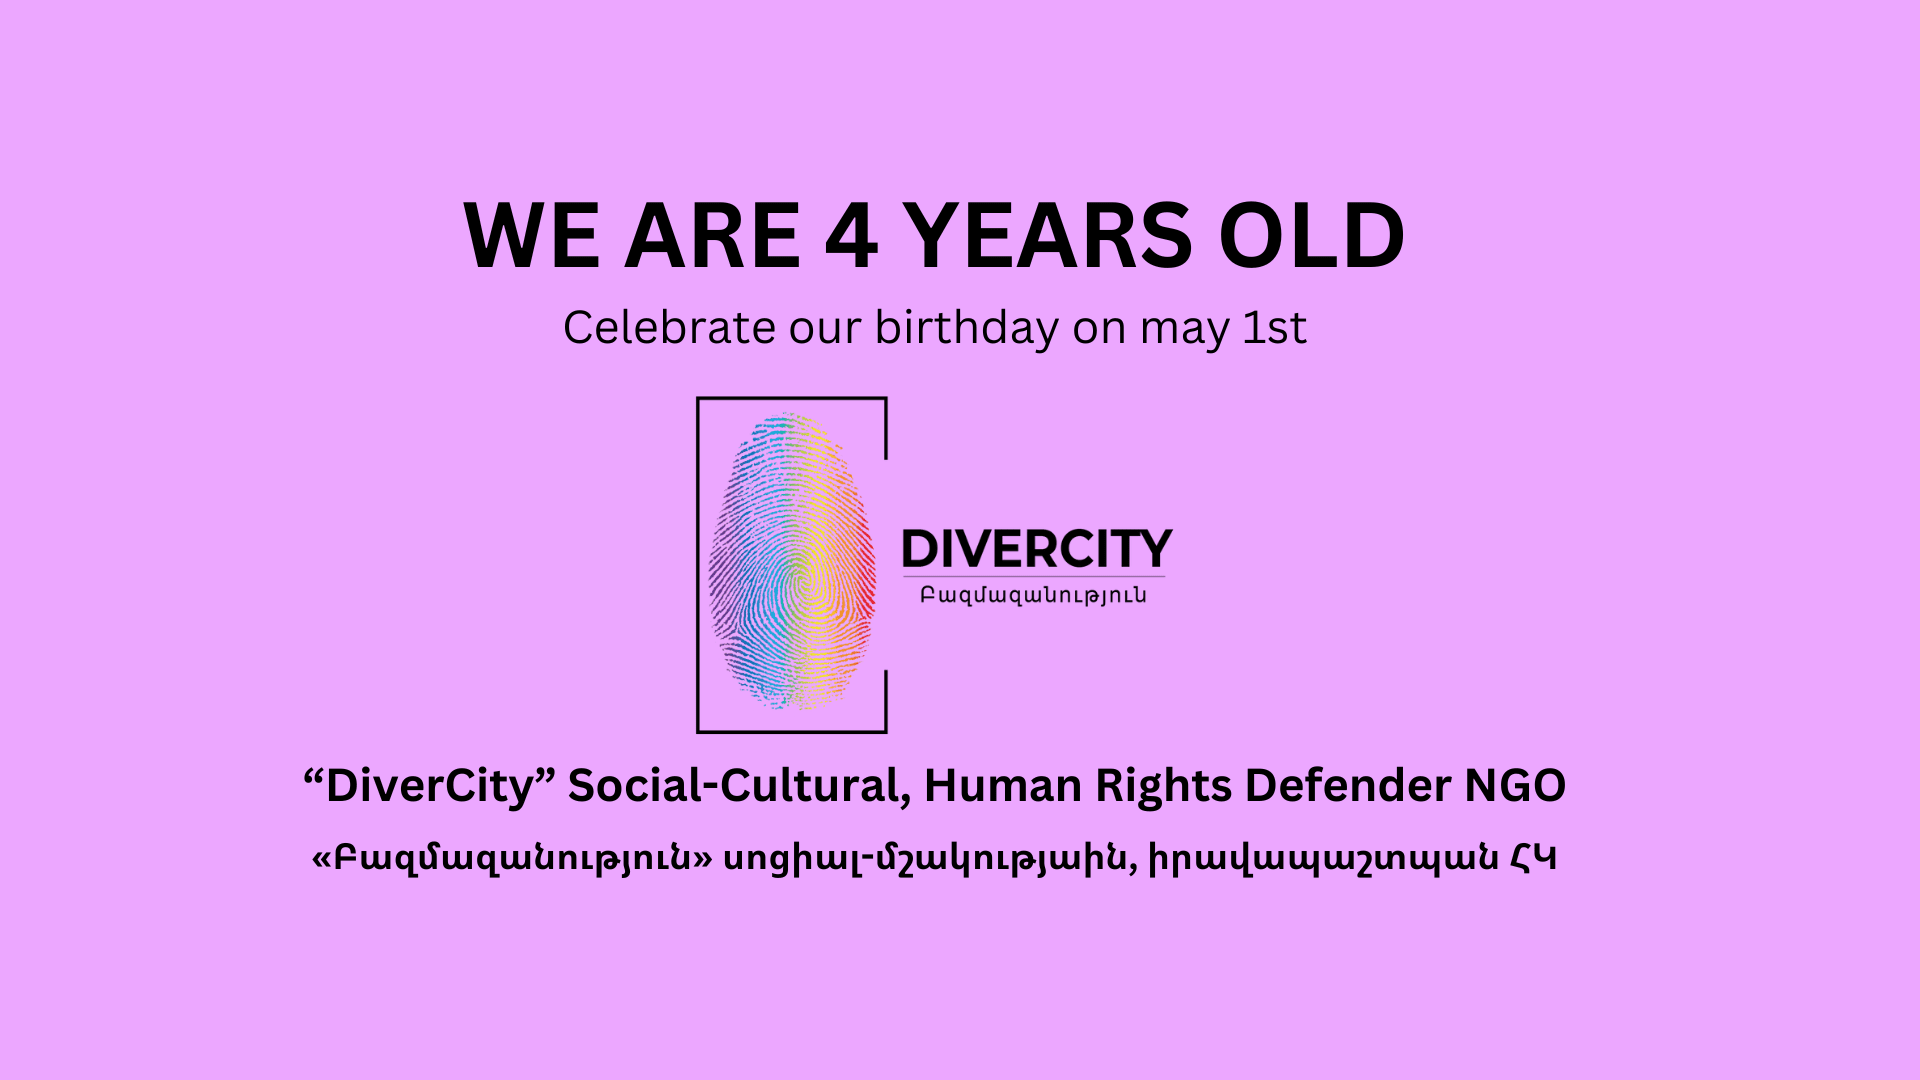 “DiverCity” NGO is 4 years old